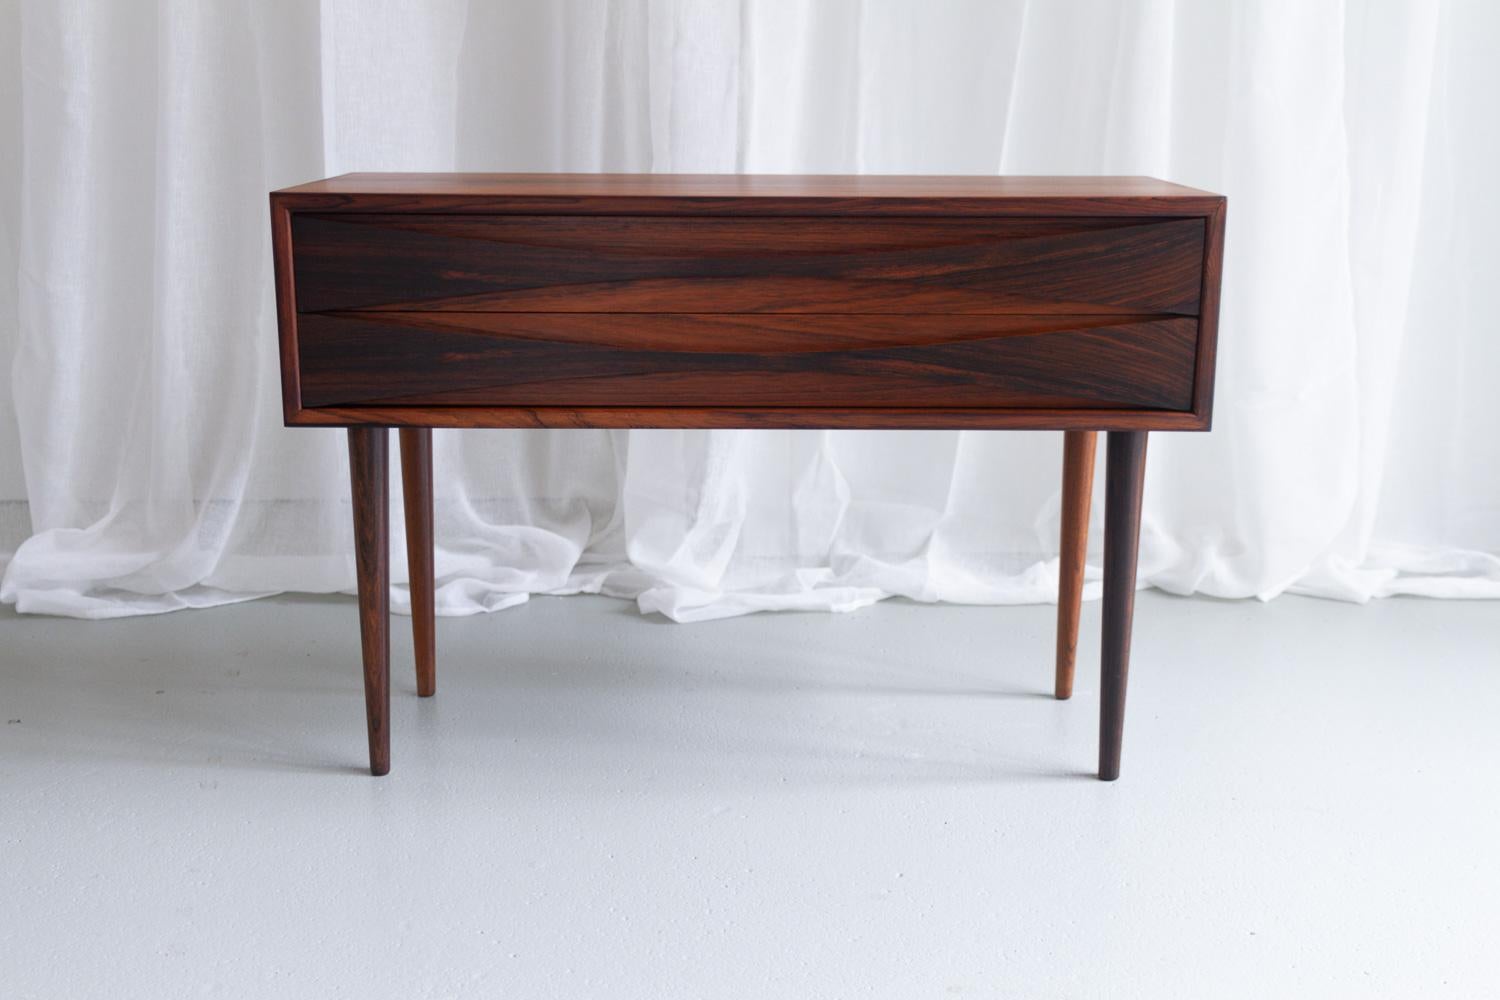 Scandinavian Modern Danish Modern Rosewood Bedside Chest by Niels Clausen for NC Møbler, 1960s. For Sale